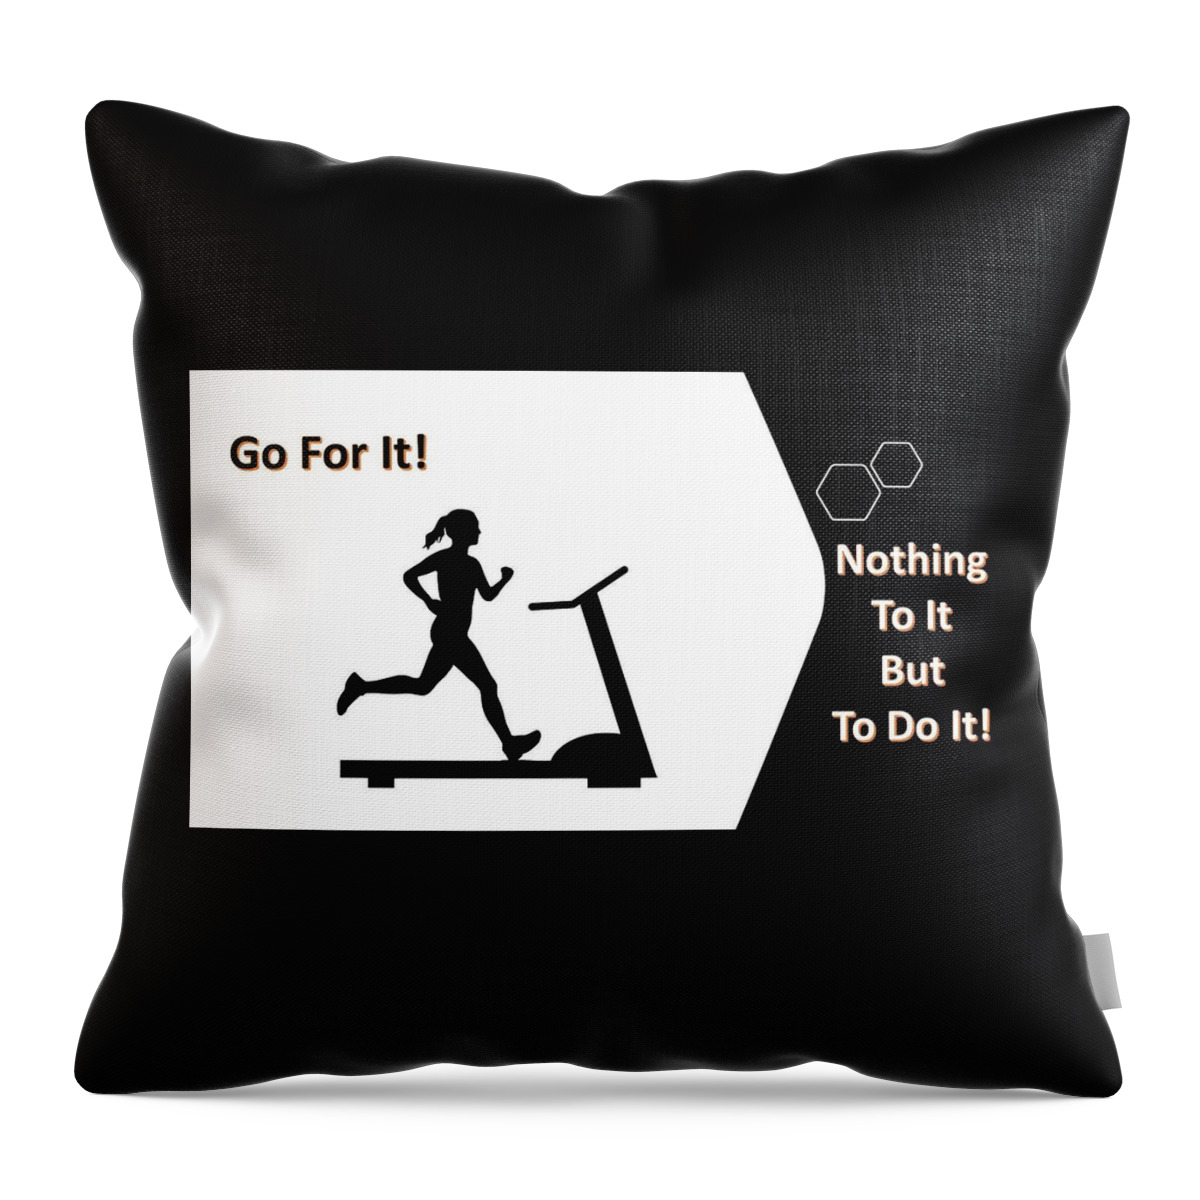 Sports Throw Pillow featuring the digital art Go For It  Nothing To It But To Do It by Nancy Ayanna Wyatt